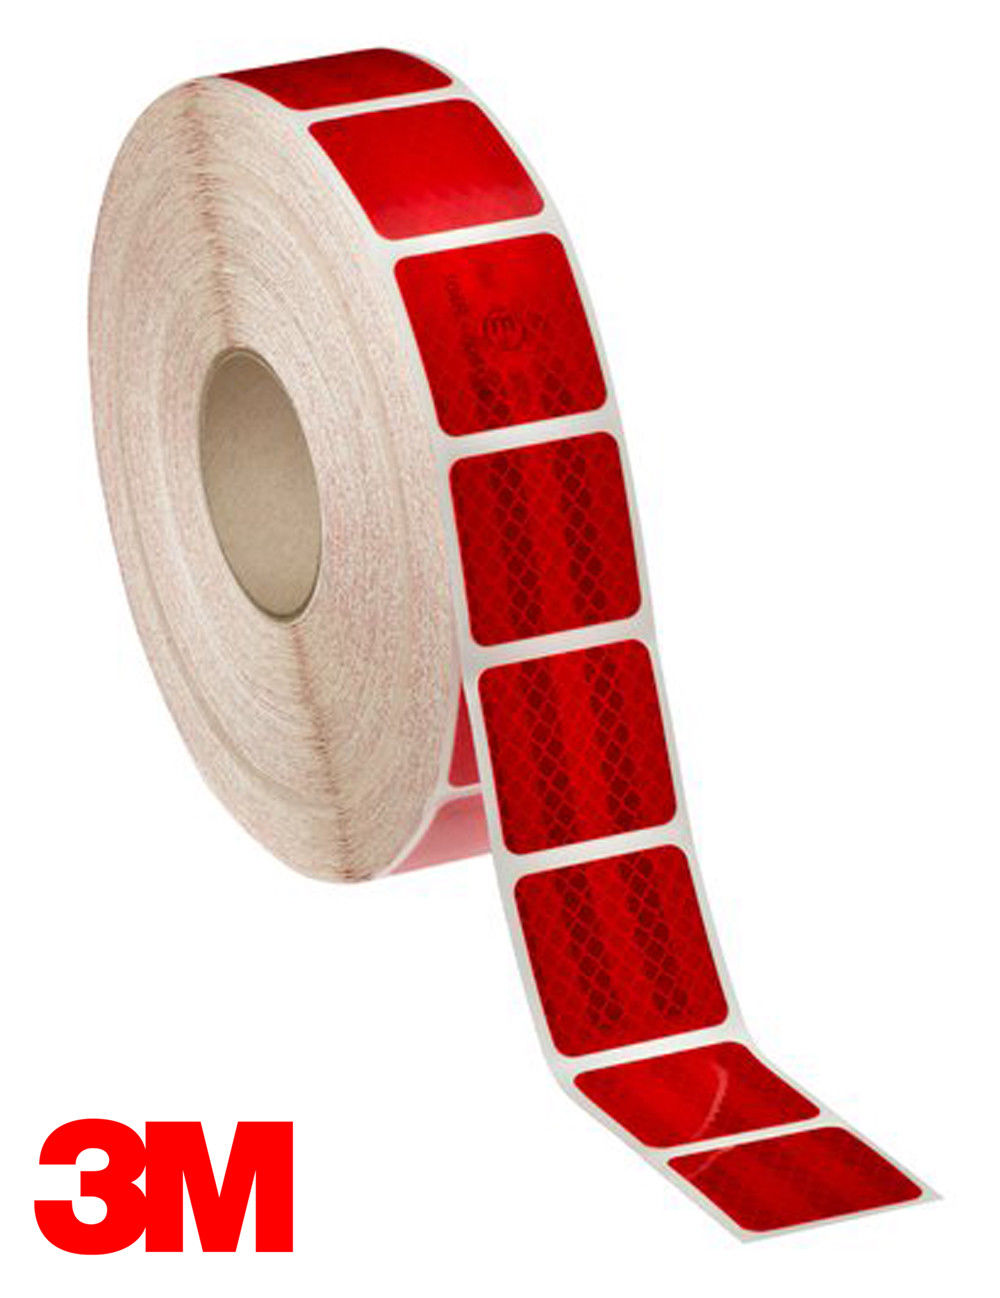 3M 987s Red Conspicuity Tape - Segmented